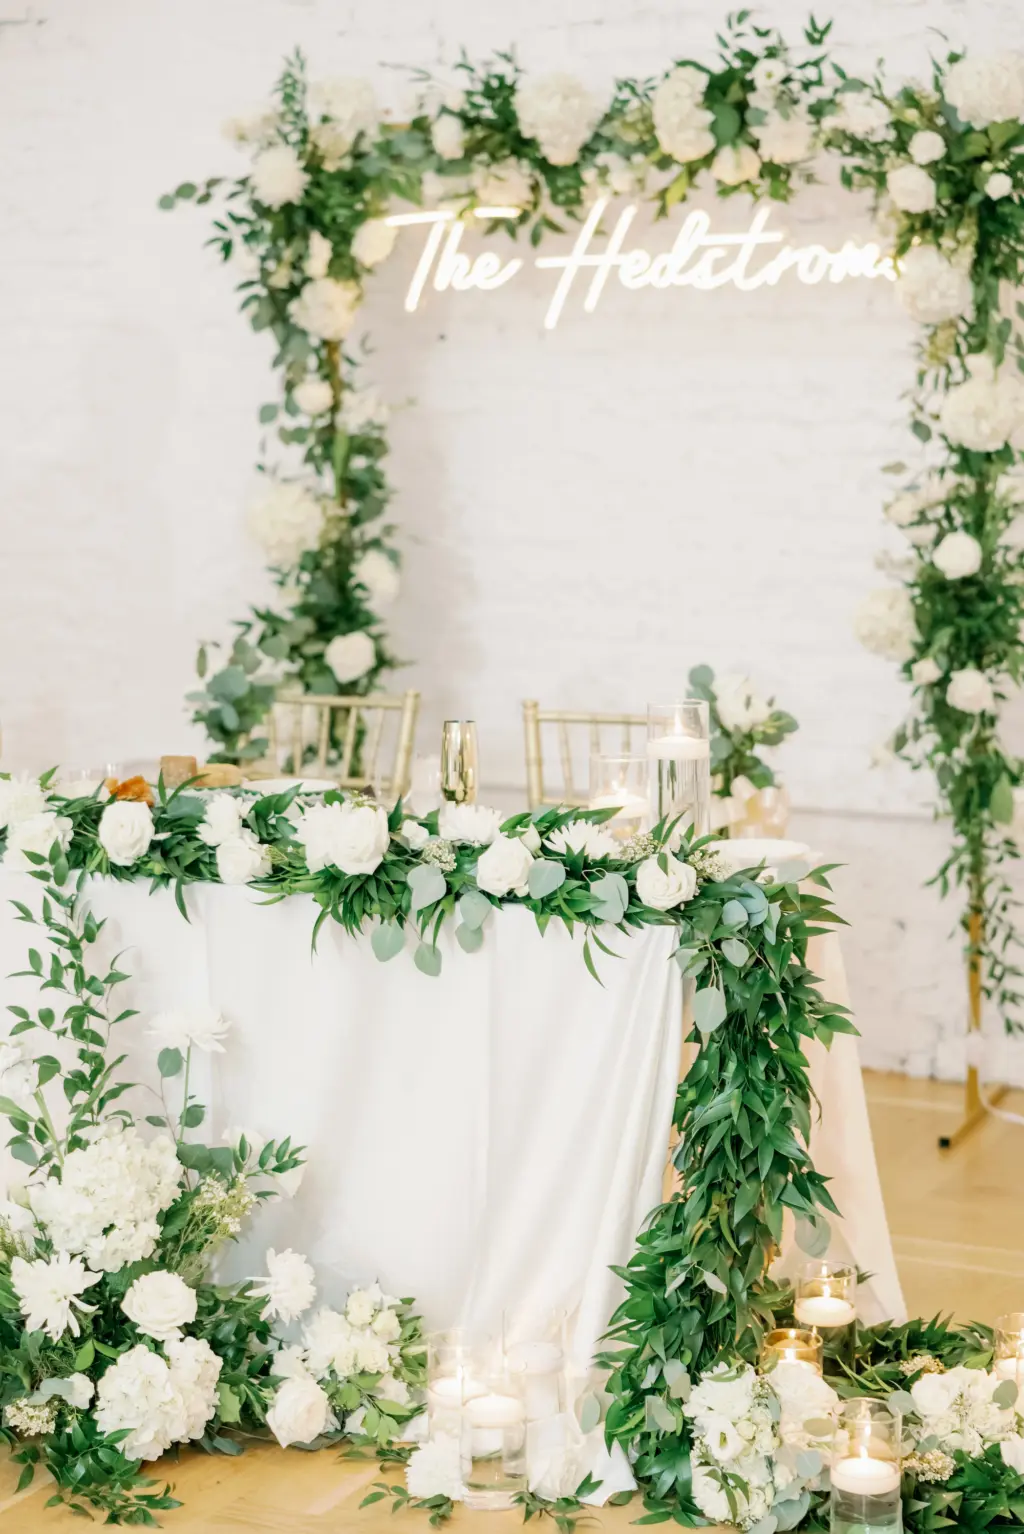 Romantic White Gold and Greenery Sweetheart Table with White Linens Wedding Inspiration | Tampa Rentals Kate Ryan Event Rentals | Planner Eventfull Weddings